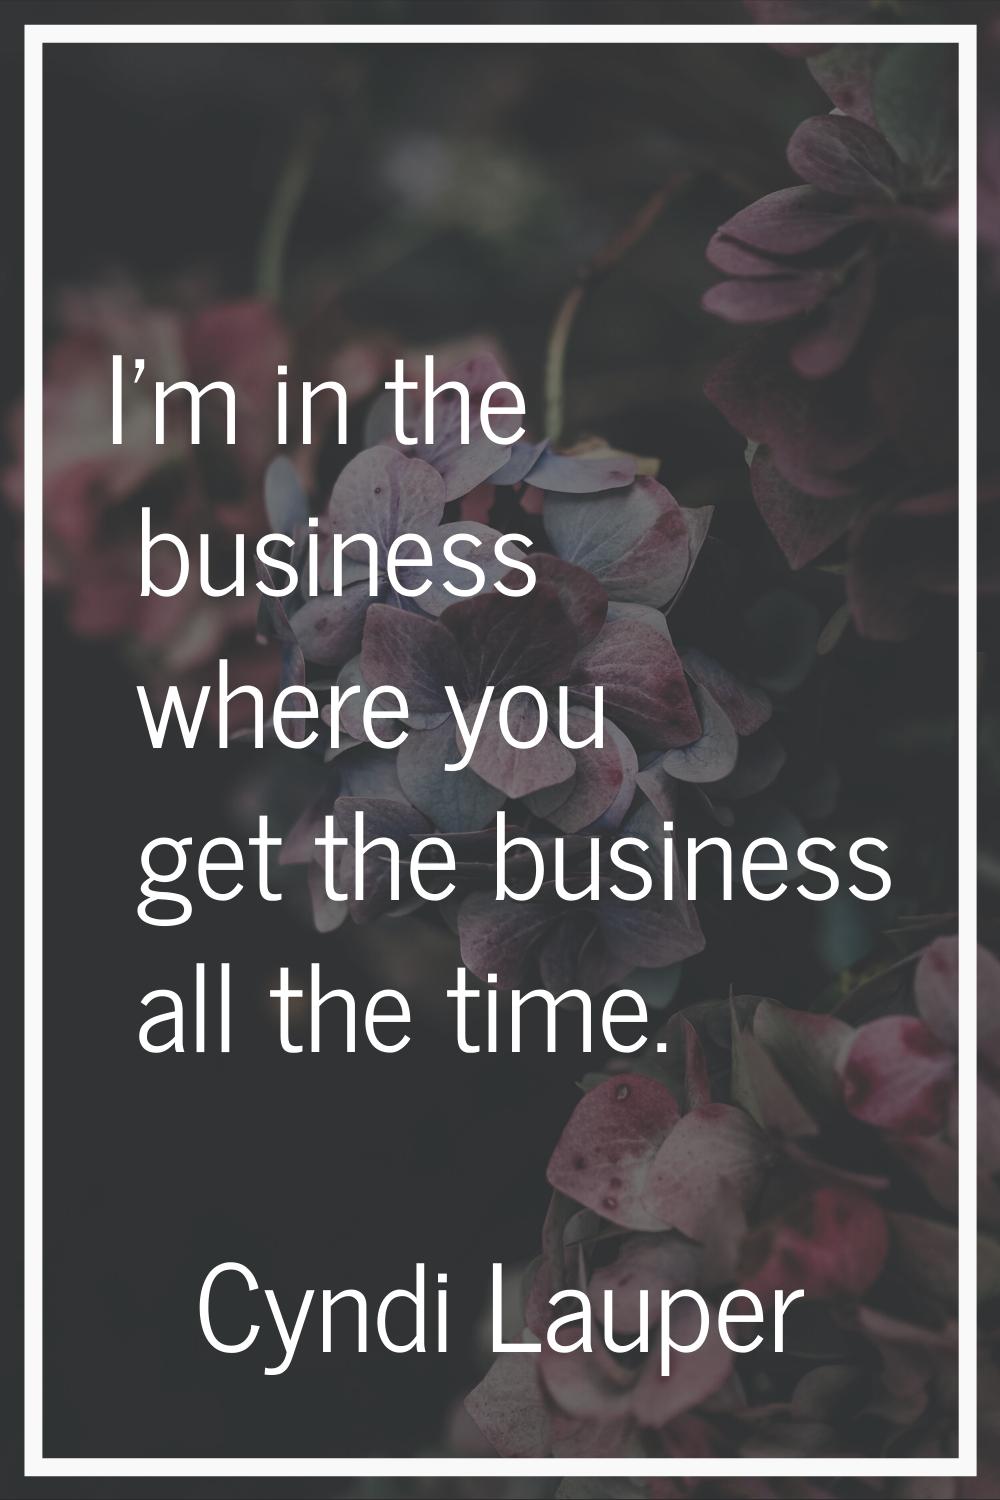 I'm in the business where you get the business all the time.